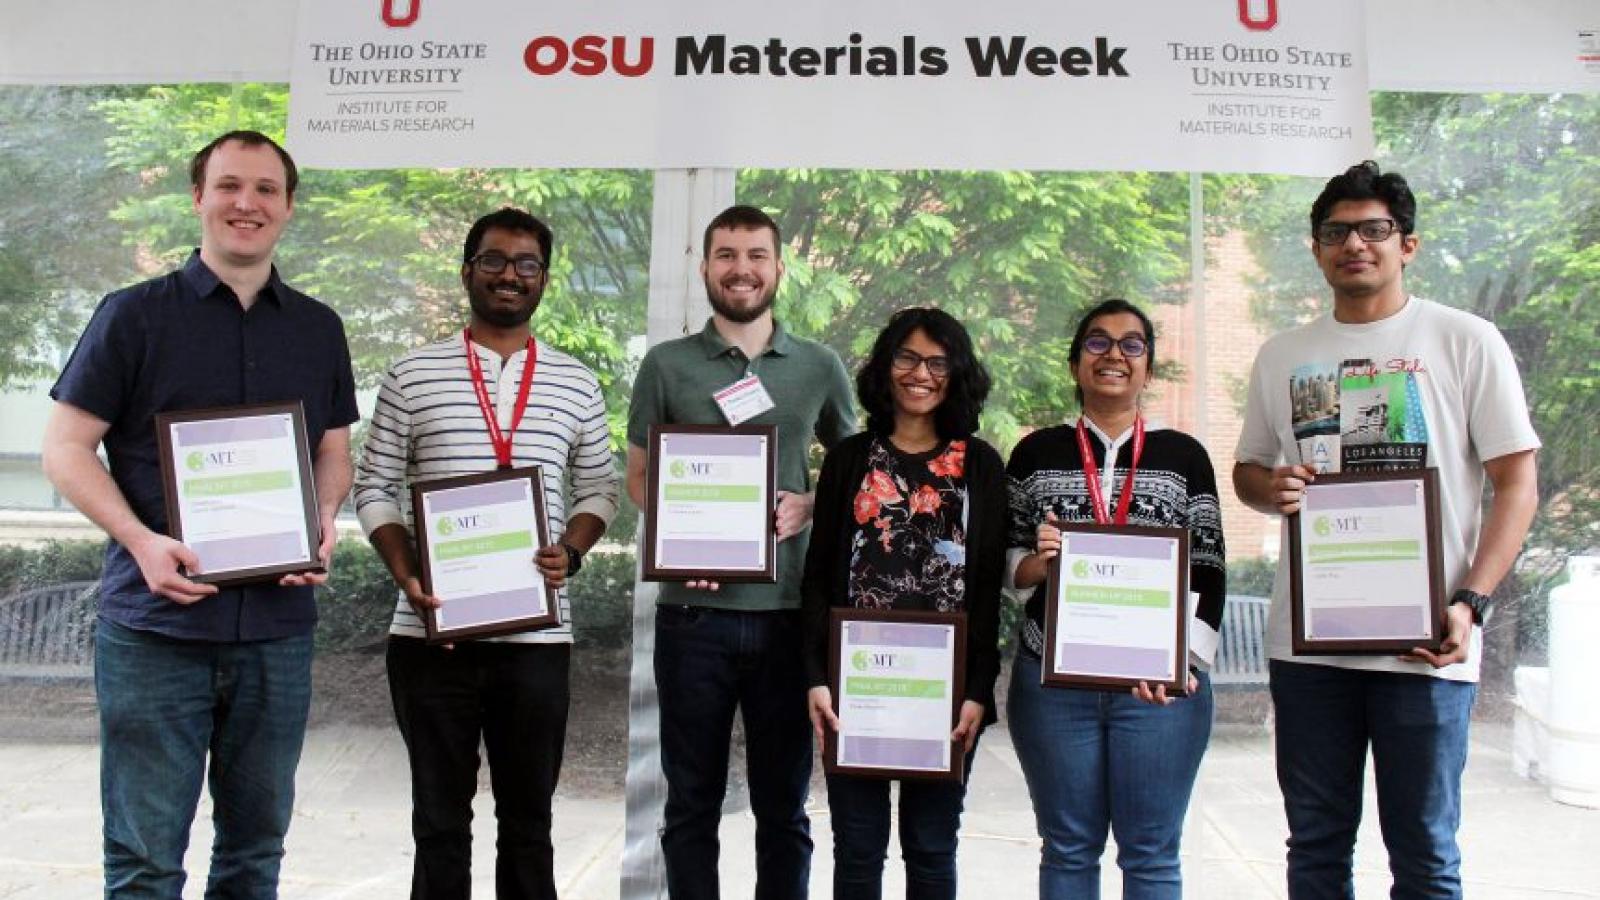 Presenters in the Three Minute Thesis challenge during Ohio State's 2019 Materials Week